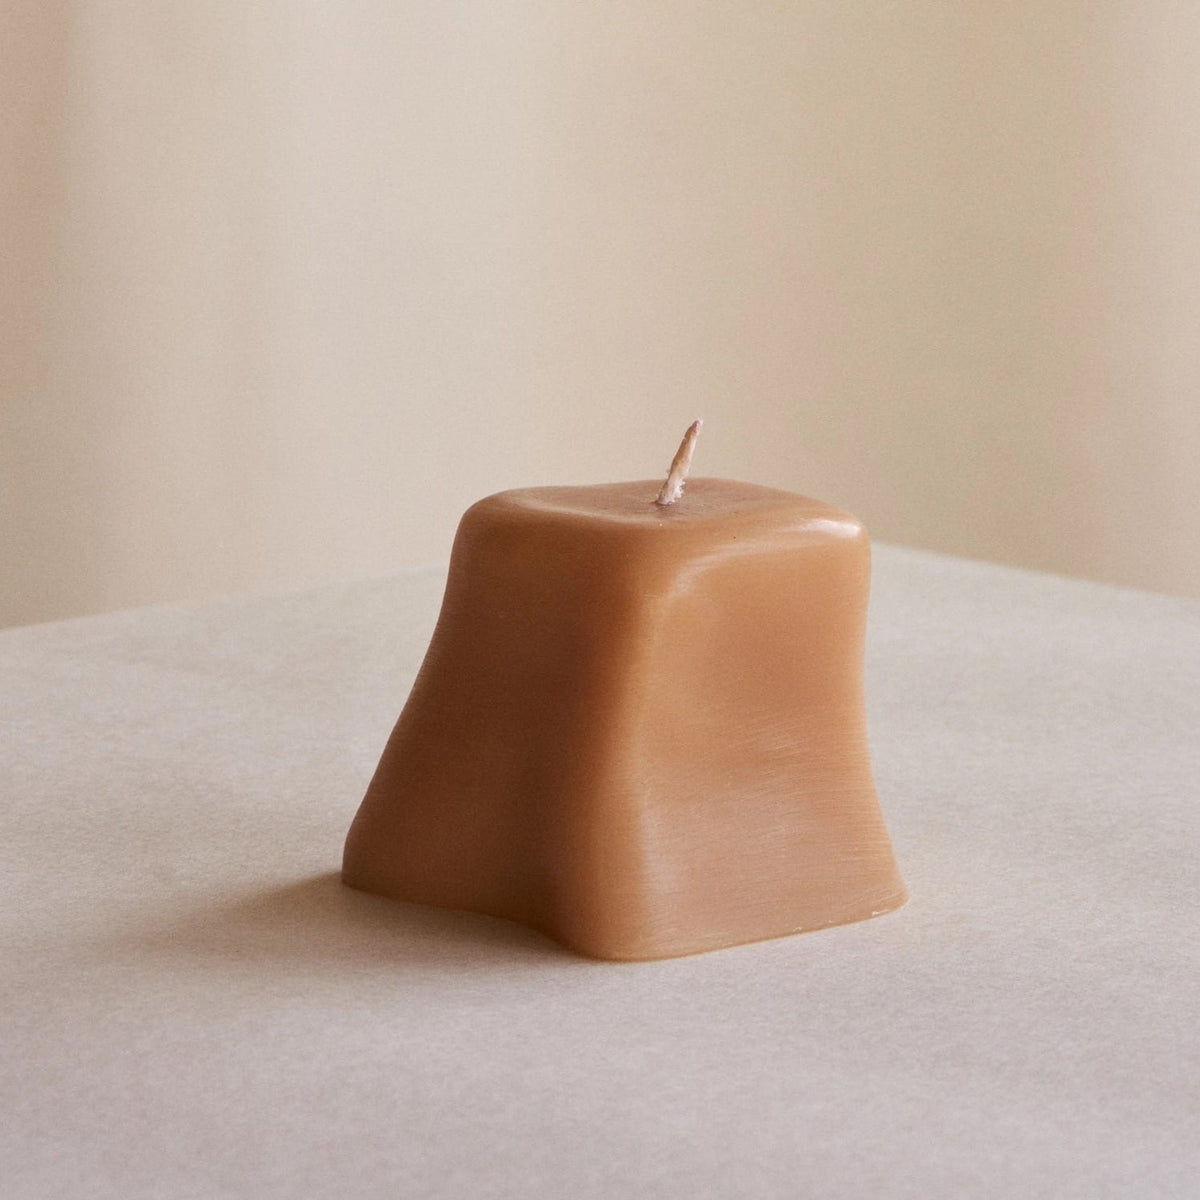 An ann vincent Sole Set candle sitting on a table with a beige background.